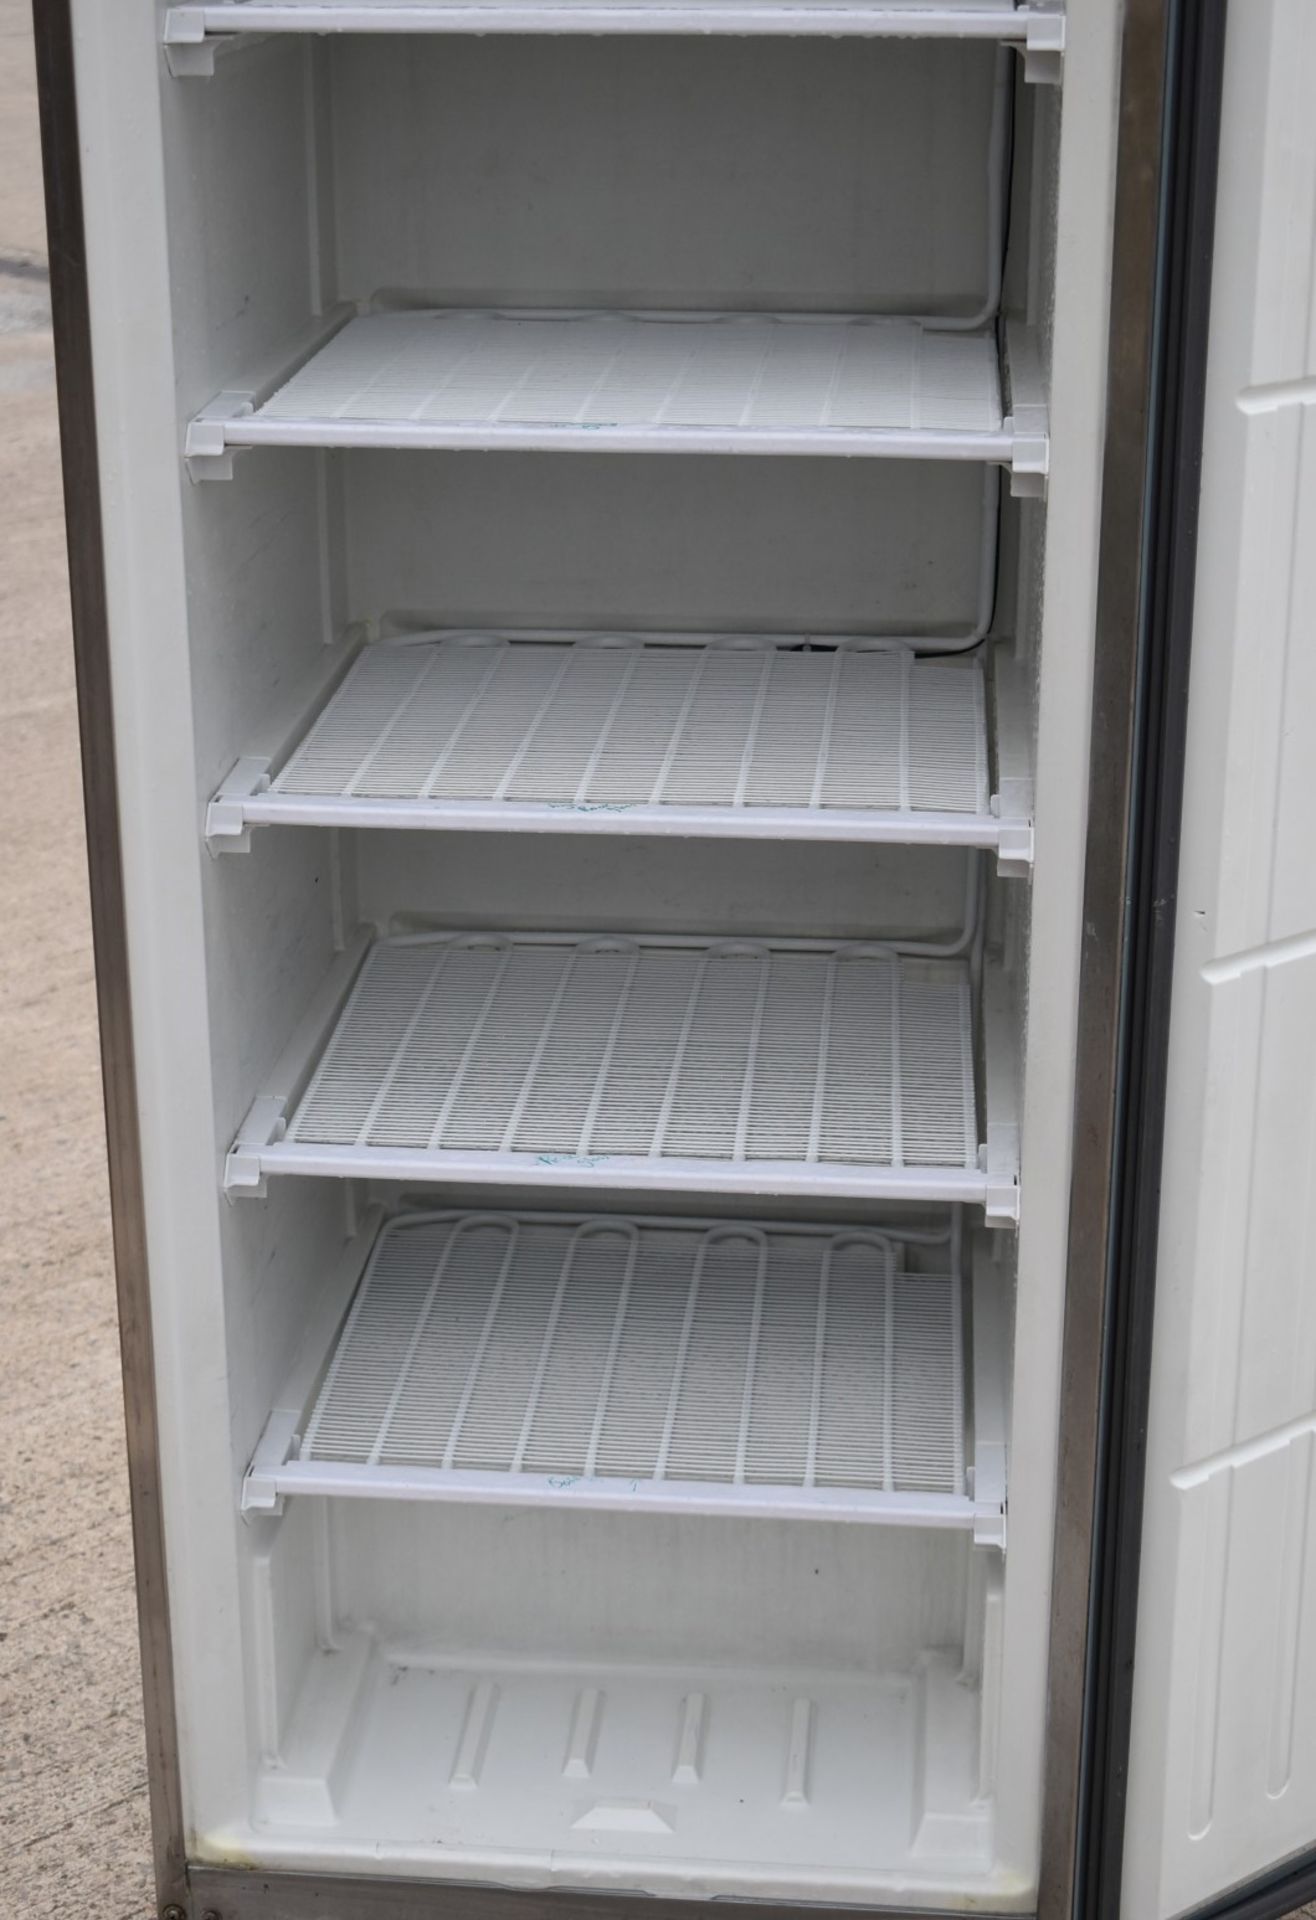 1 x Polar CD083 Upright Freezer With Stainless Steel Exterior - Dimensions: H185 x W60 x D60 cms - Image 10 of 11